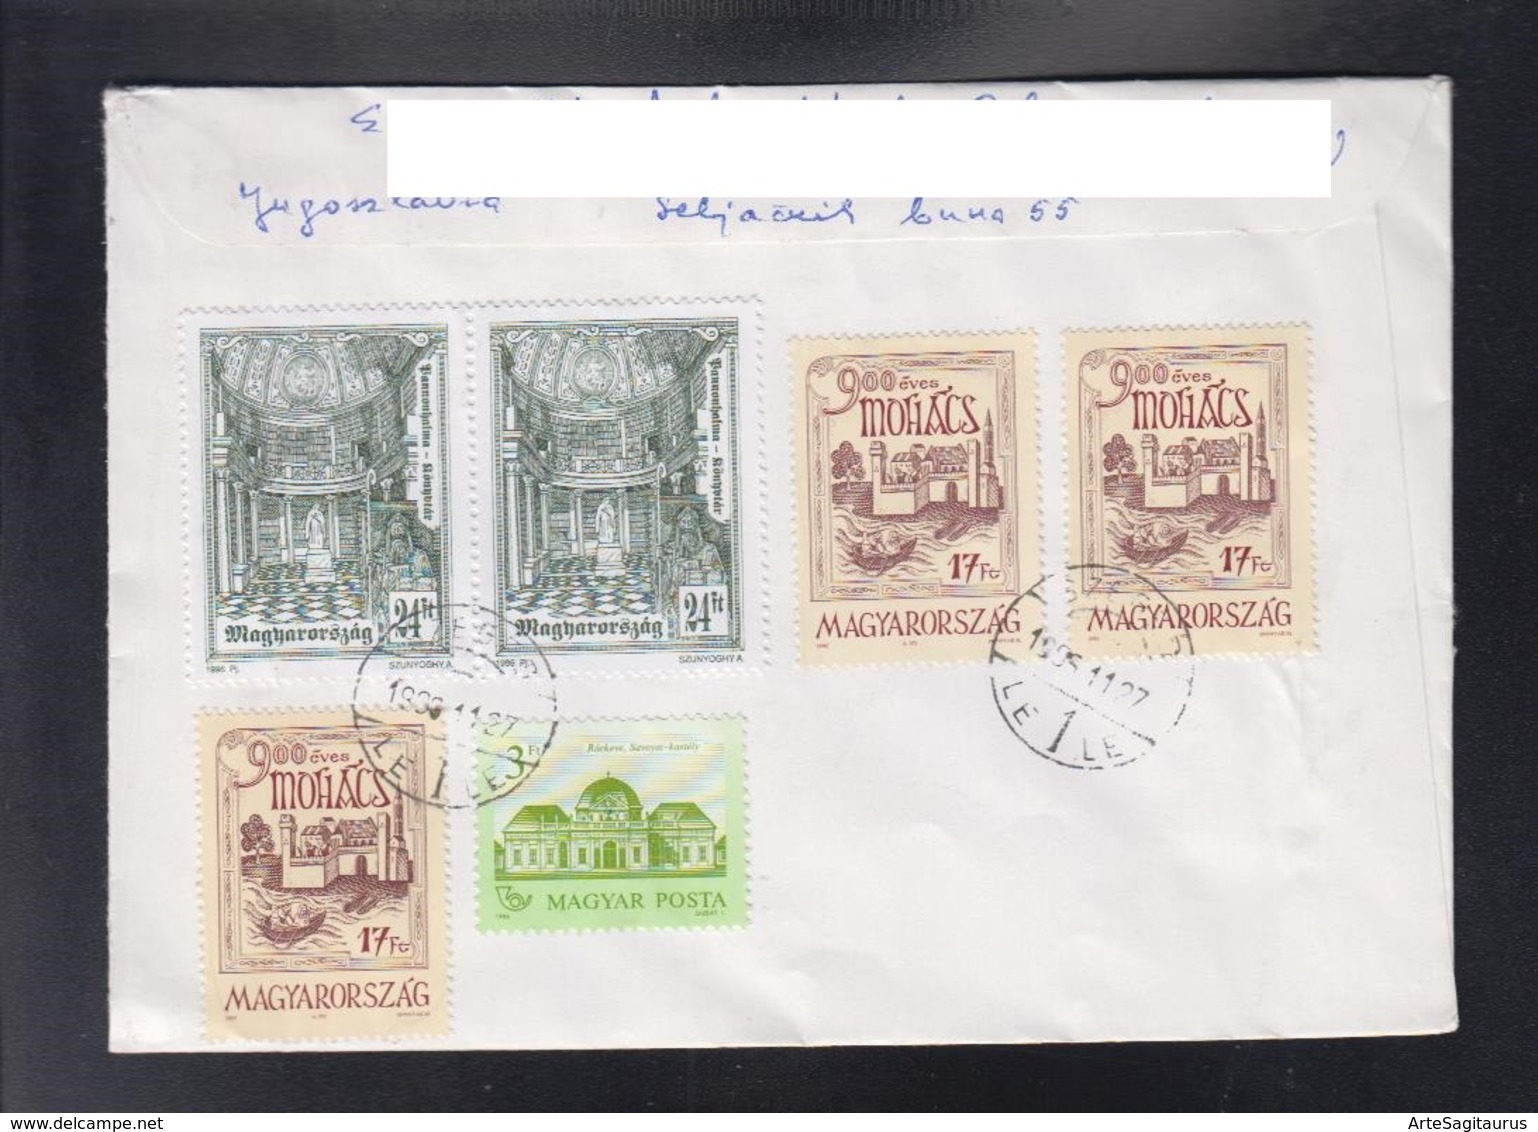 HUNGARY, COVER / REPUBLIC OF MACEDONIA ** - Covers & Documents